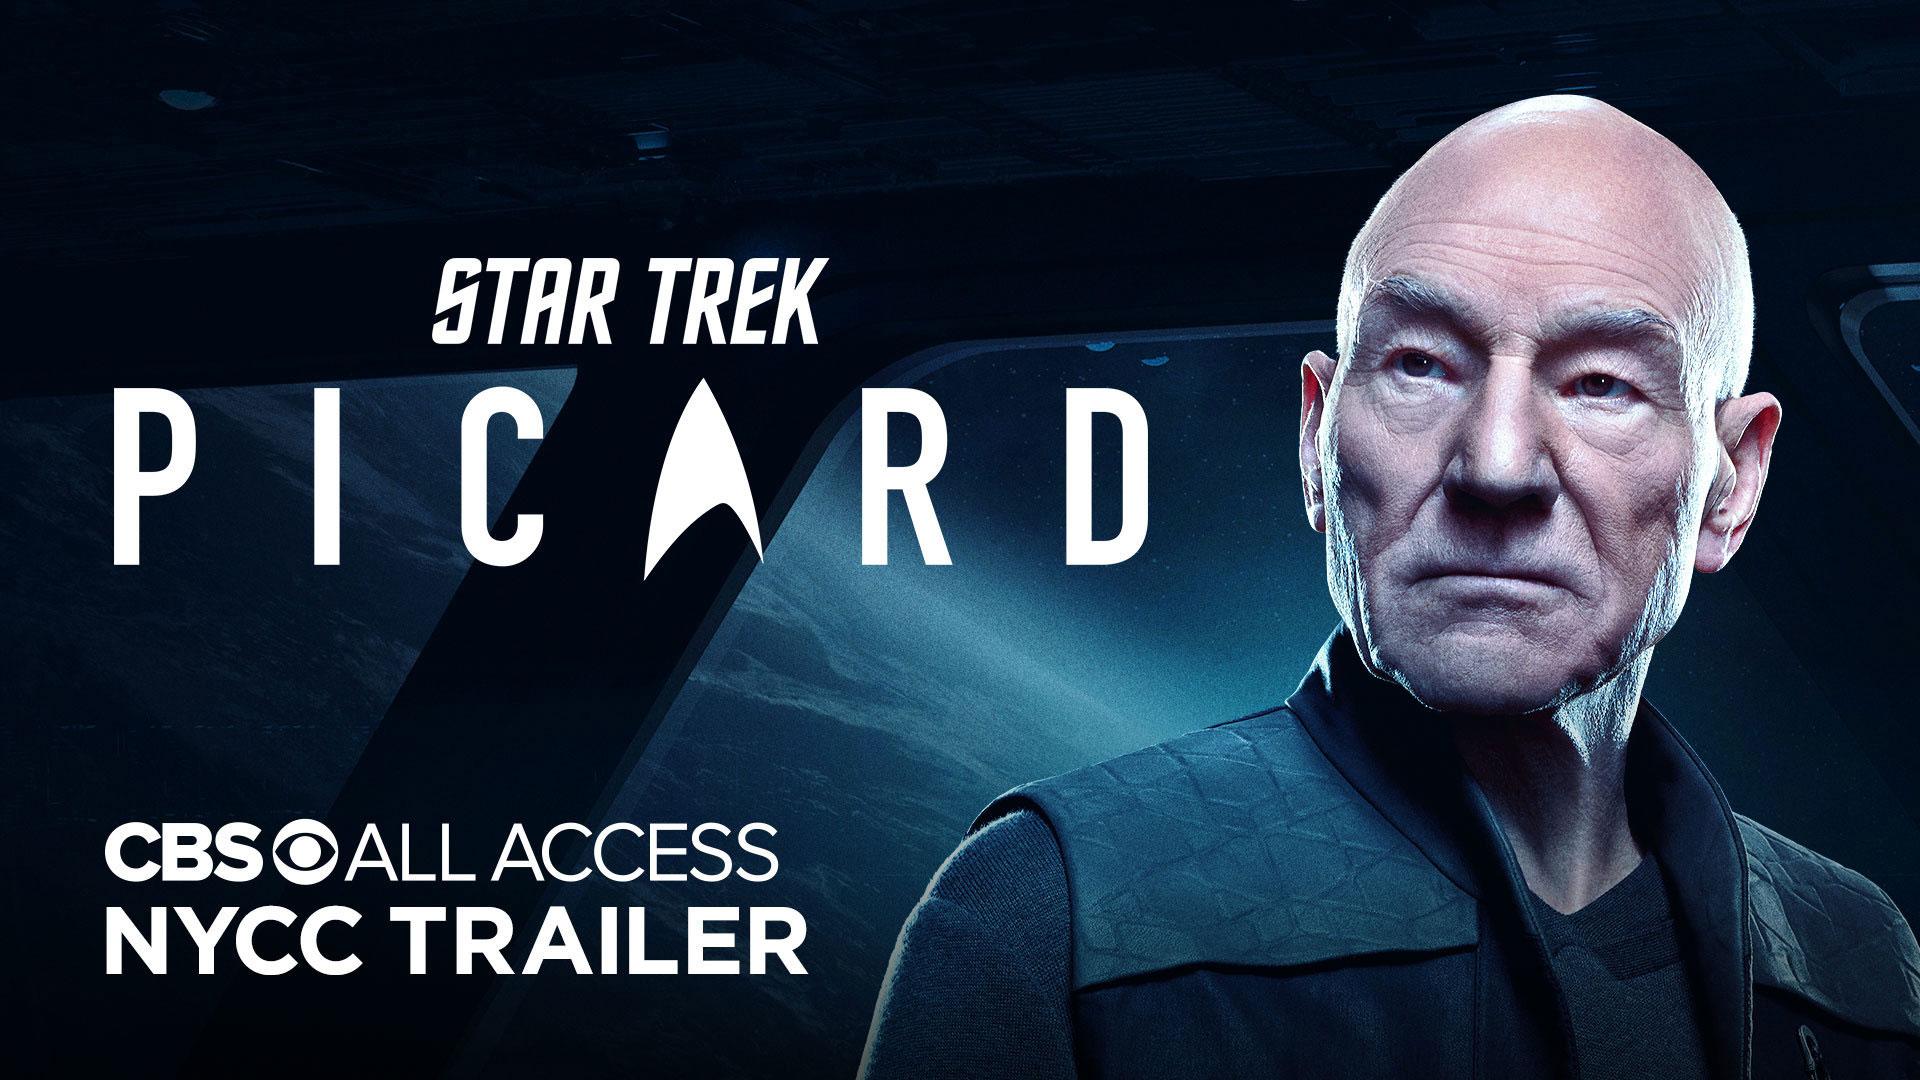 Watch The NYCC For Star Trek: Picard, Coming To CBS